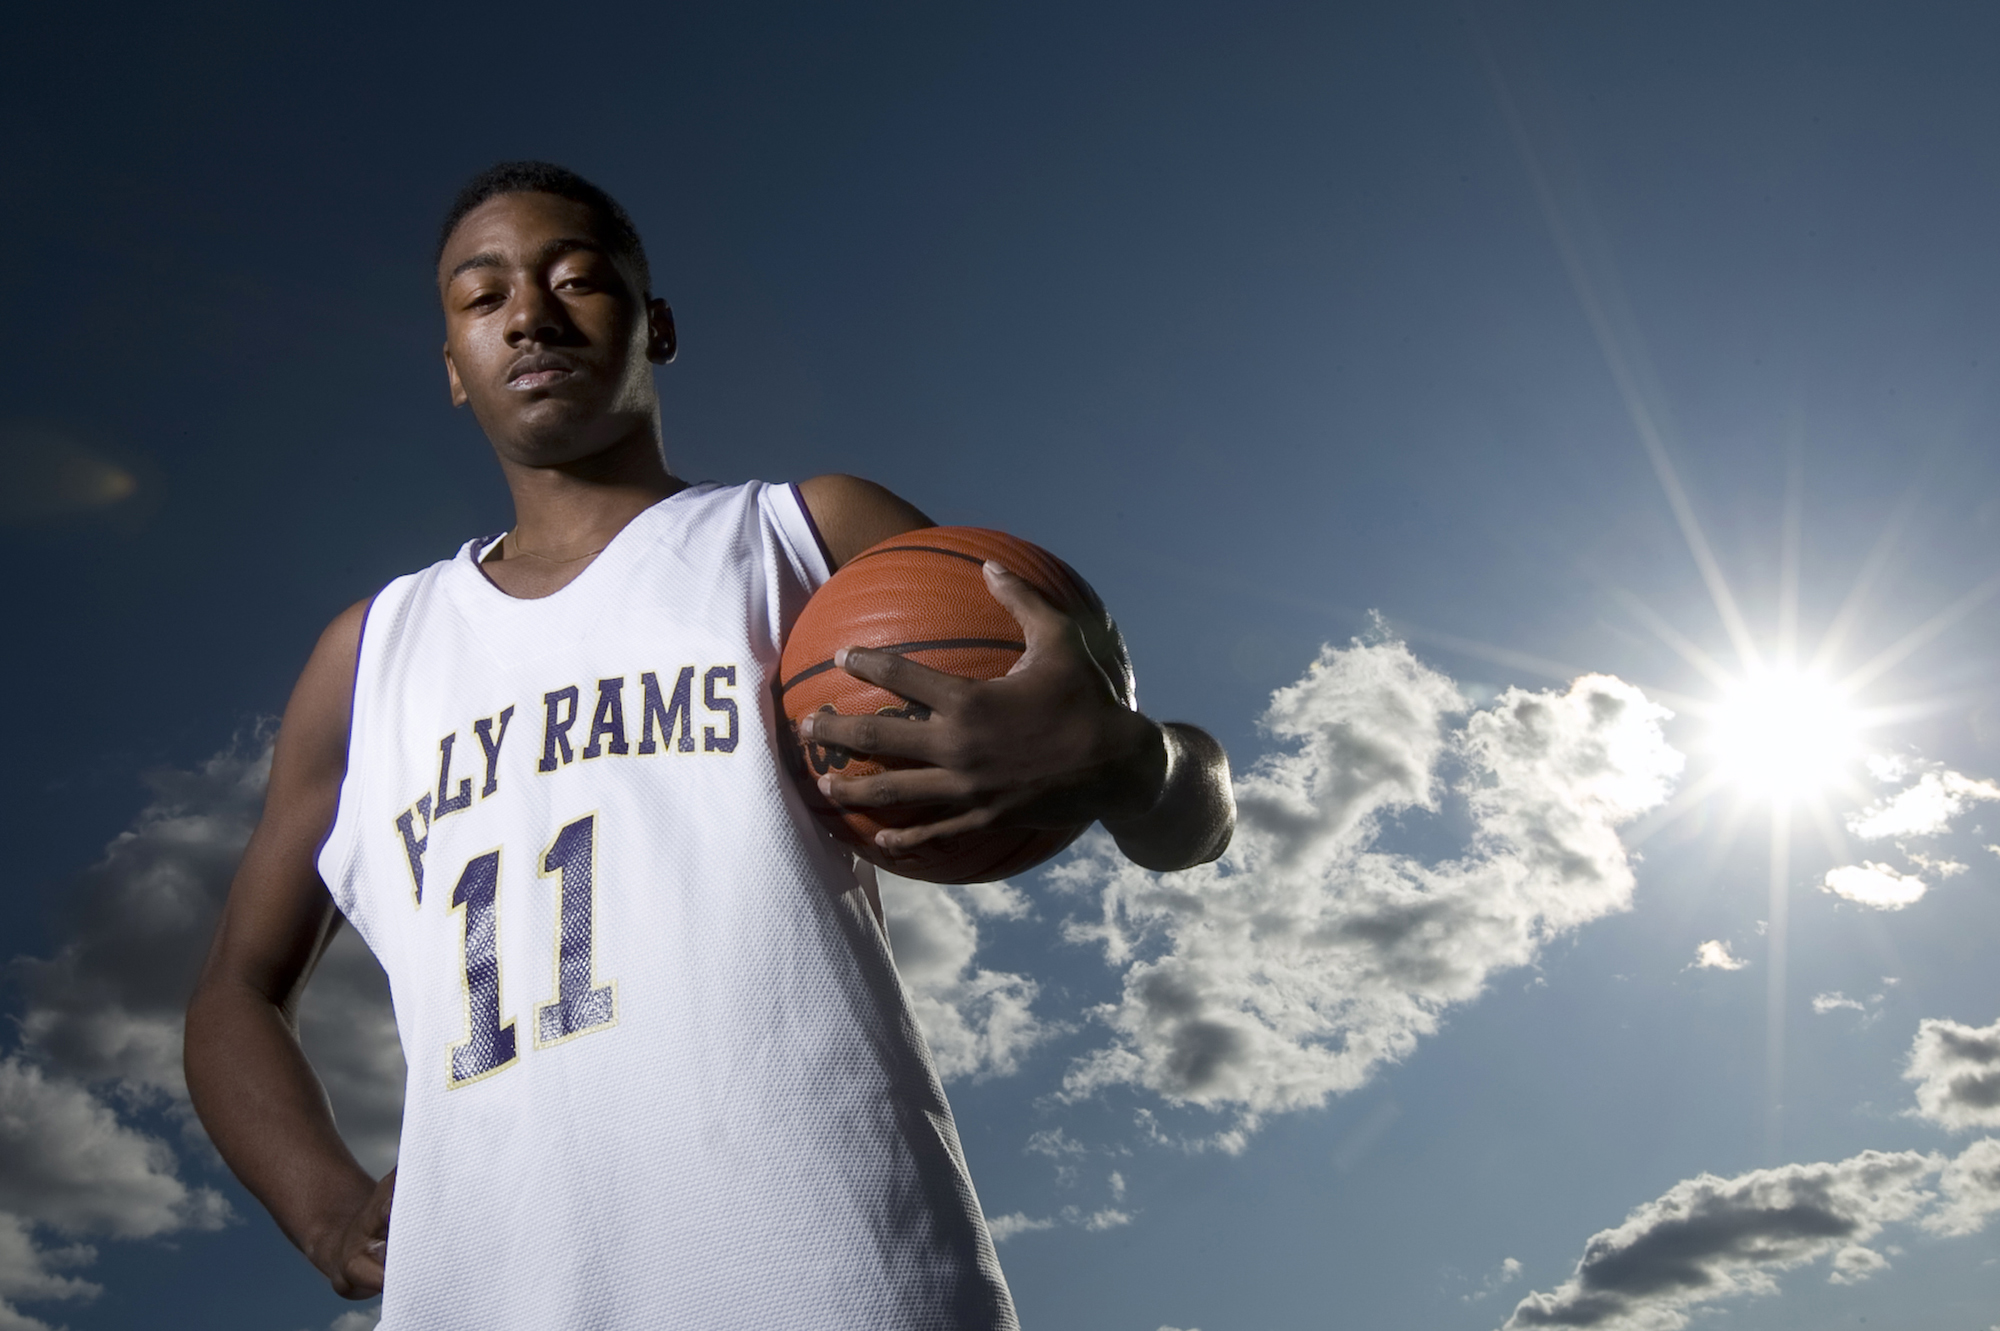 John Wall was an ALL-USA player during his high school career at Word Of God (Photo: Shawn Rocco)